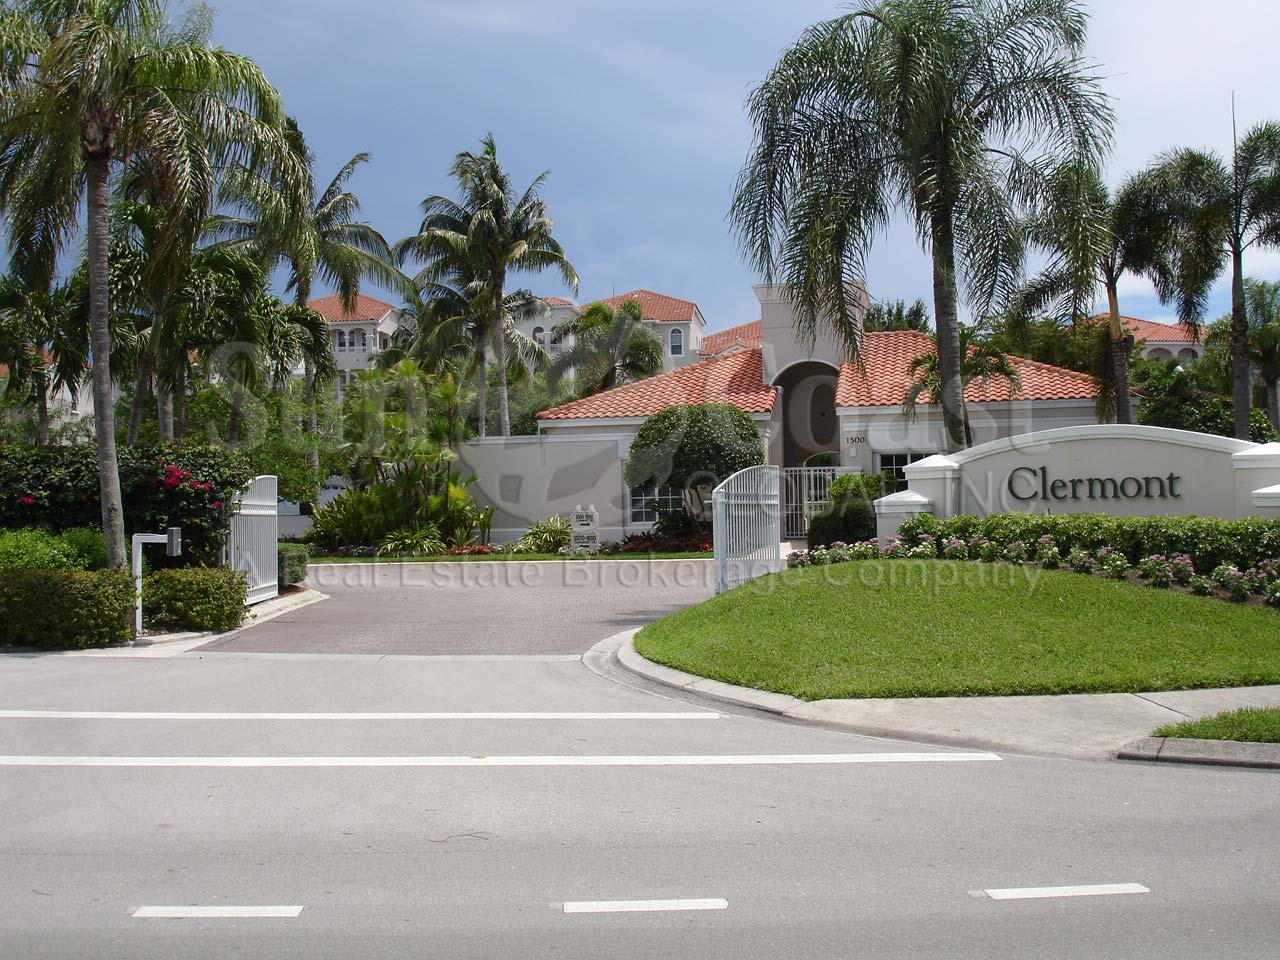 Clermont gated coded entry